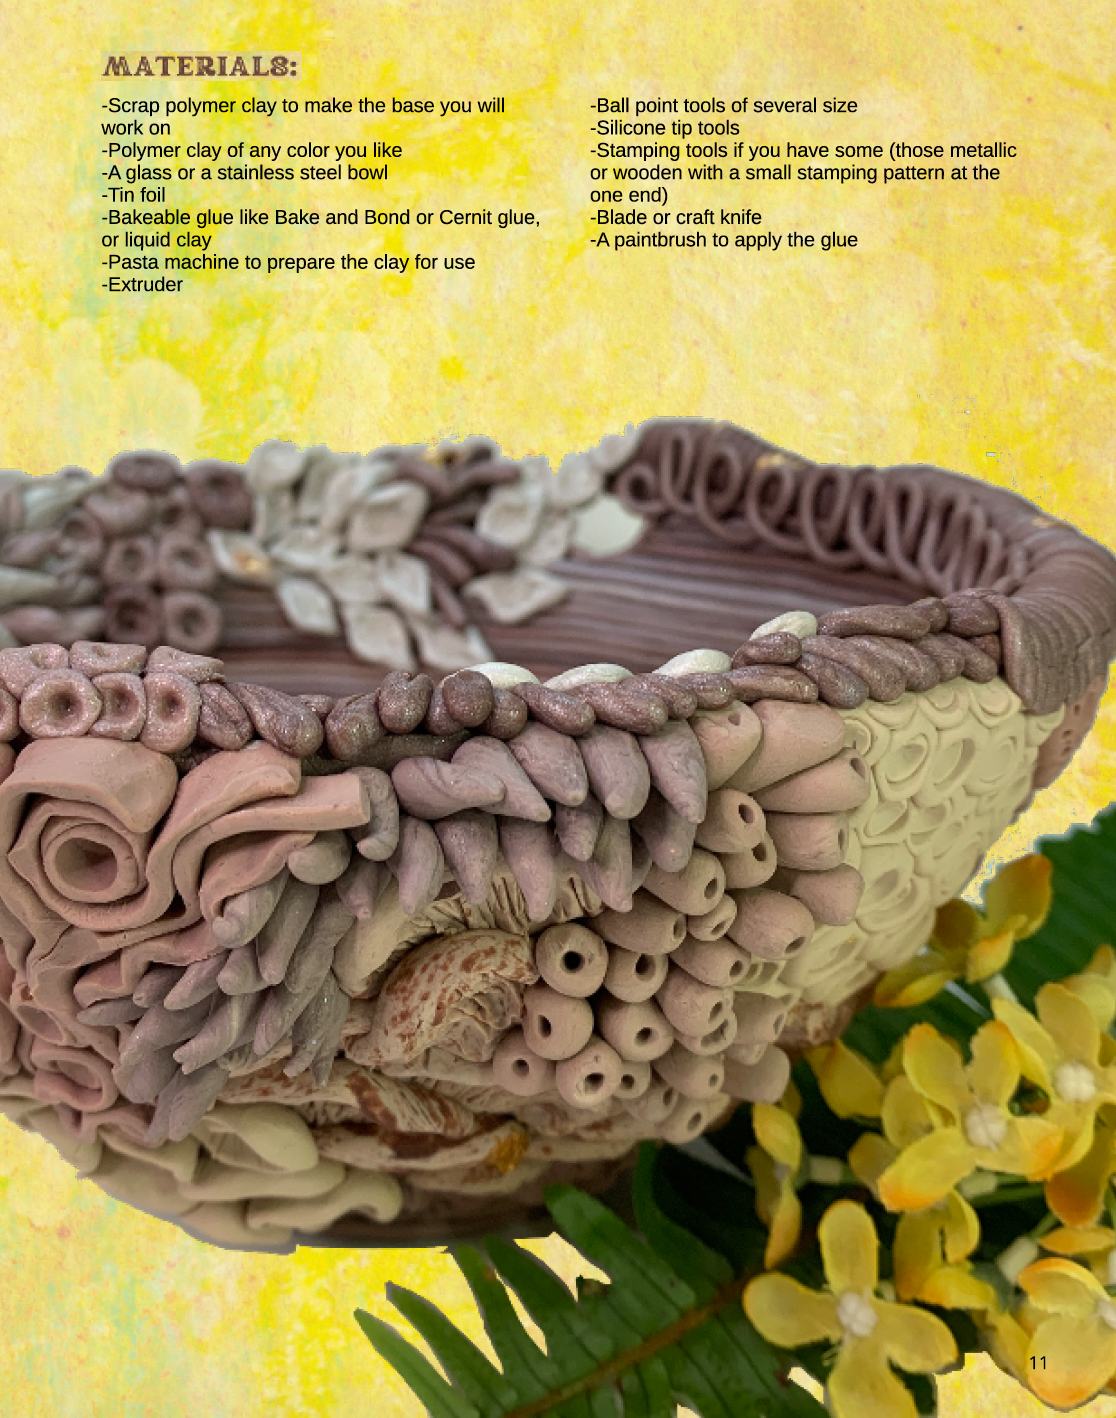 Texture Tutorials Magazine: March 2022 Passion for Polymer Clay DIGITAL Downloadable PDF